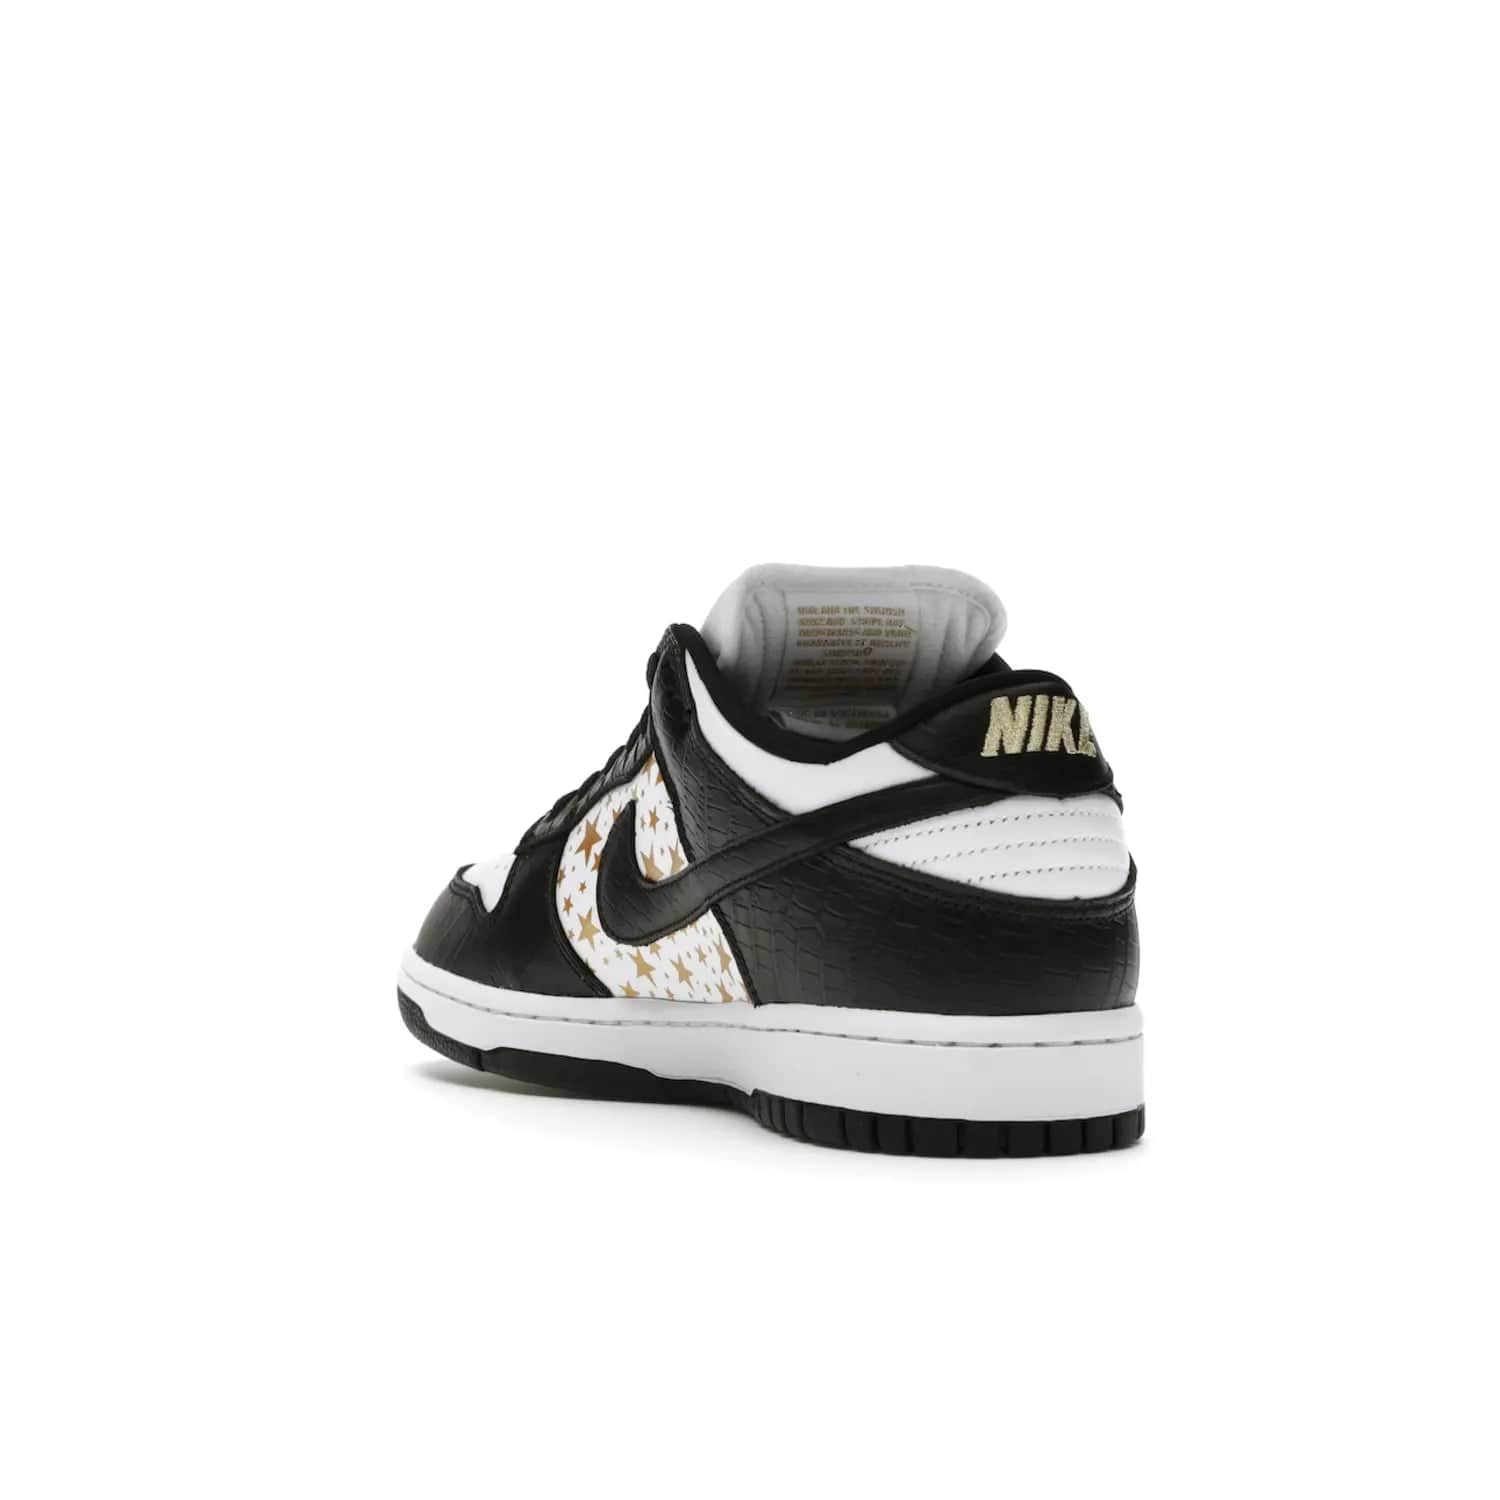 Nike SB Dunk Low Supreme Stars Black (2021) - Image 25 - Only at www.BallersClubKickz.com - Retro style and signature details make the Nike SB Dunk Low Supreme Black a must-have. This special edition shoe features a white leather upper and black croc skin overlays complemented by gold stars and deubré. Enjoy a piece of SB history and grab yours today.